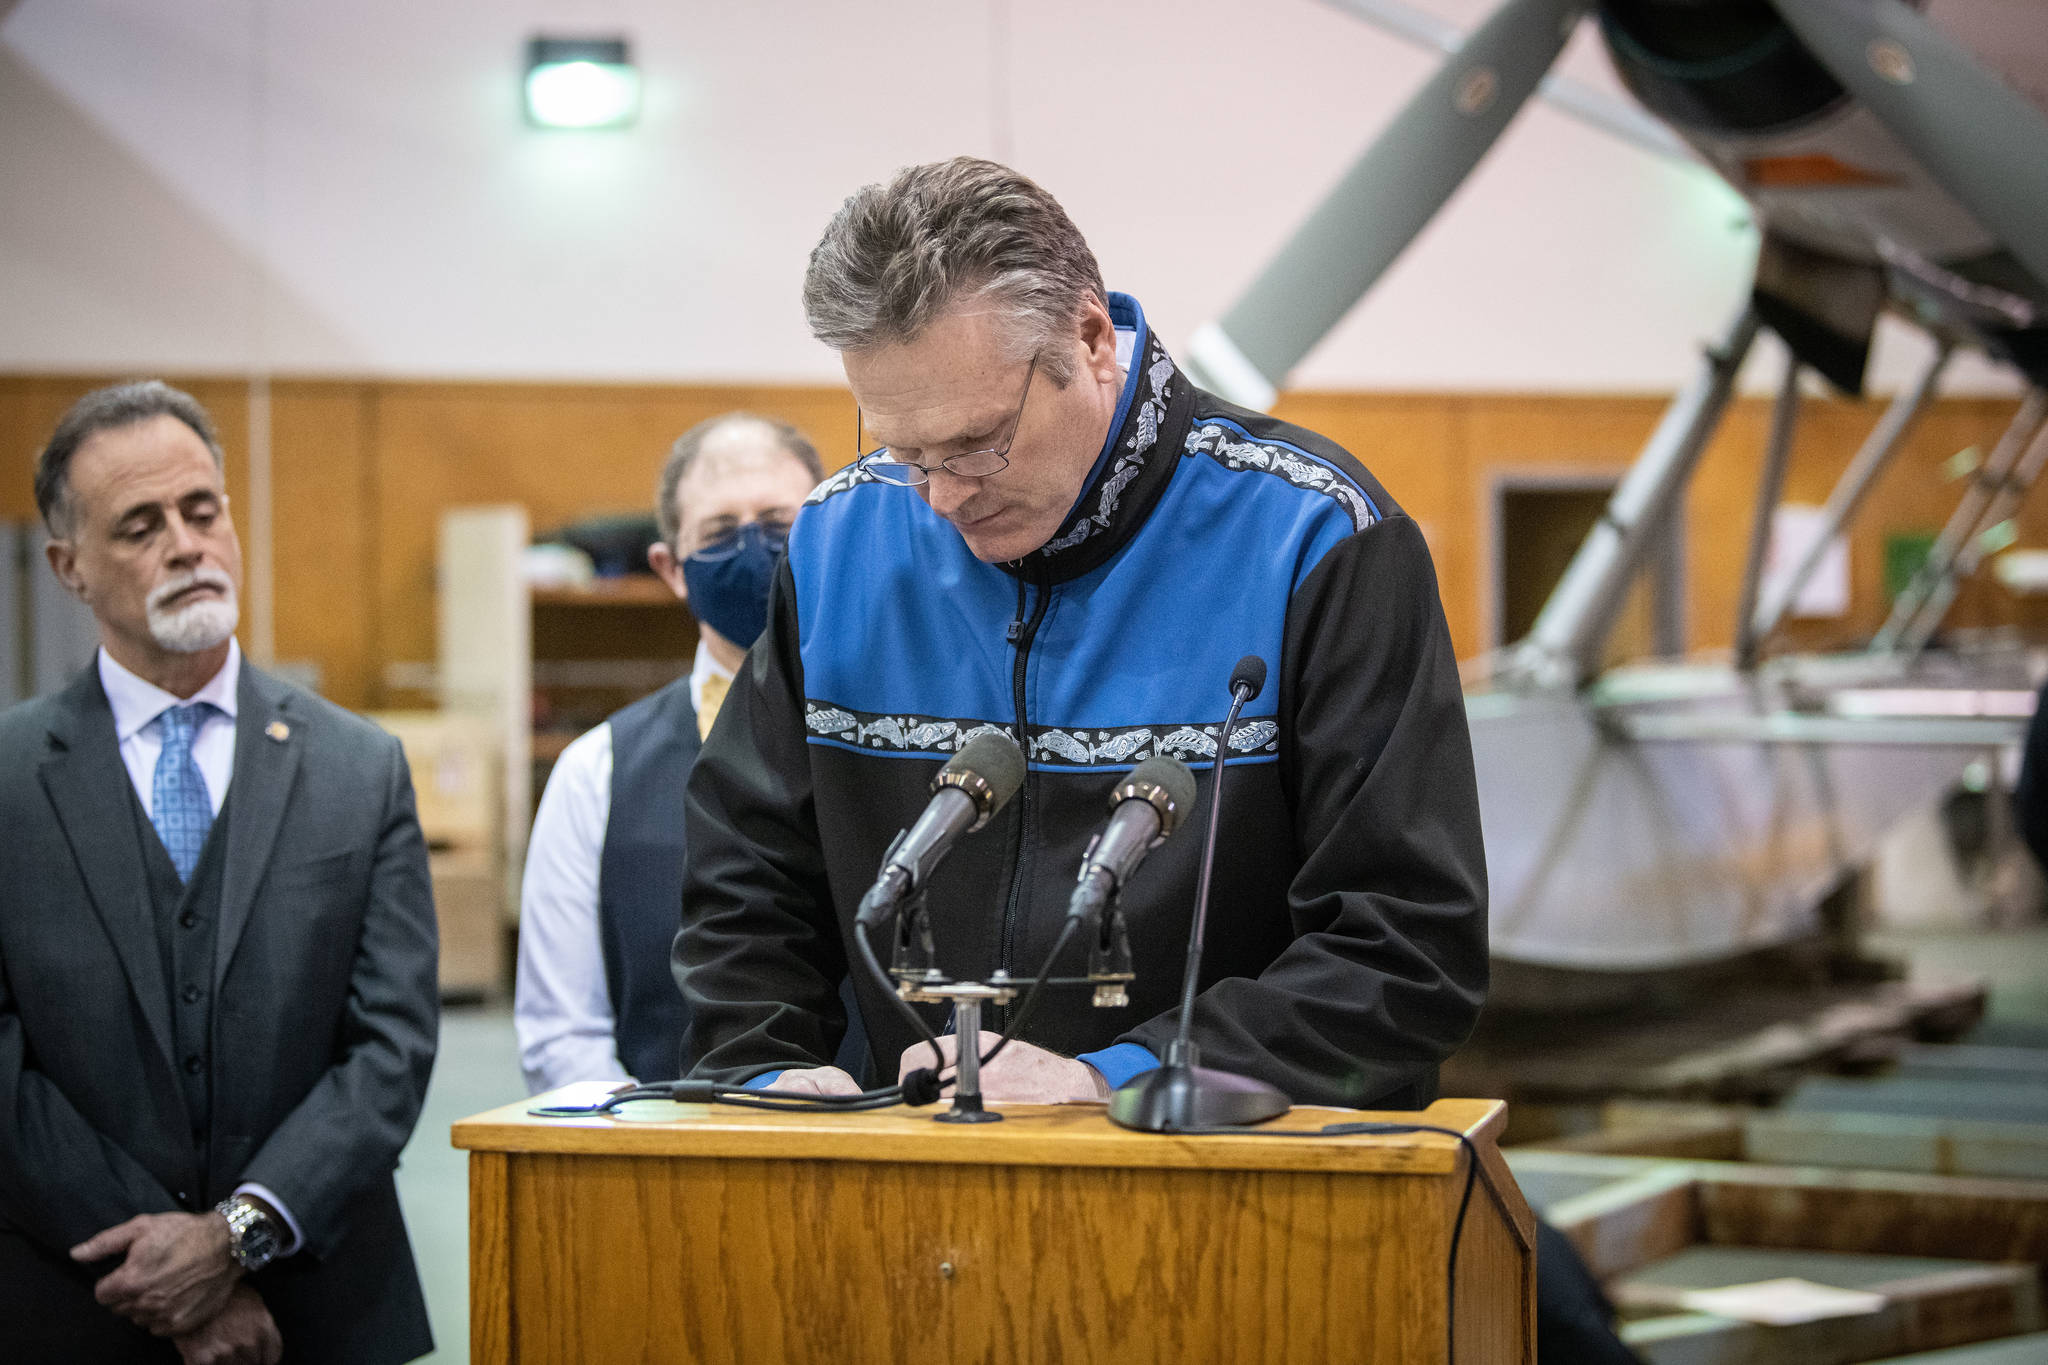 Gov. Mike Dunleavy announces a tourism aid initiative during a press conference on Friday, April 9, 2021, at Wings Airways Hangar in Juneau, Alaska. Dunleavy was joined by officials and business owners, including Alaska Sen. Peter Micciche (left). (Governer’s Office/Kevin Goodman)